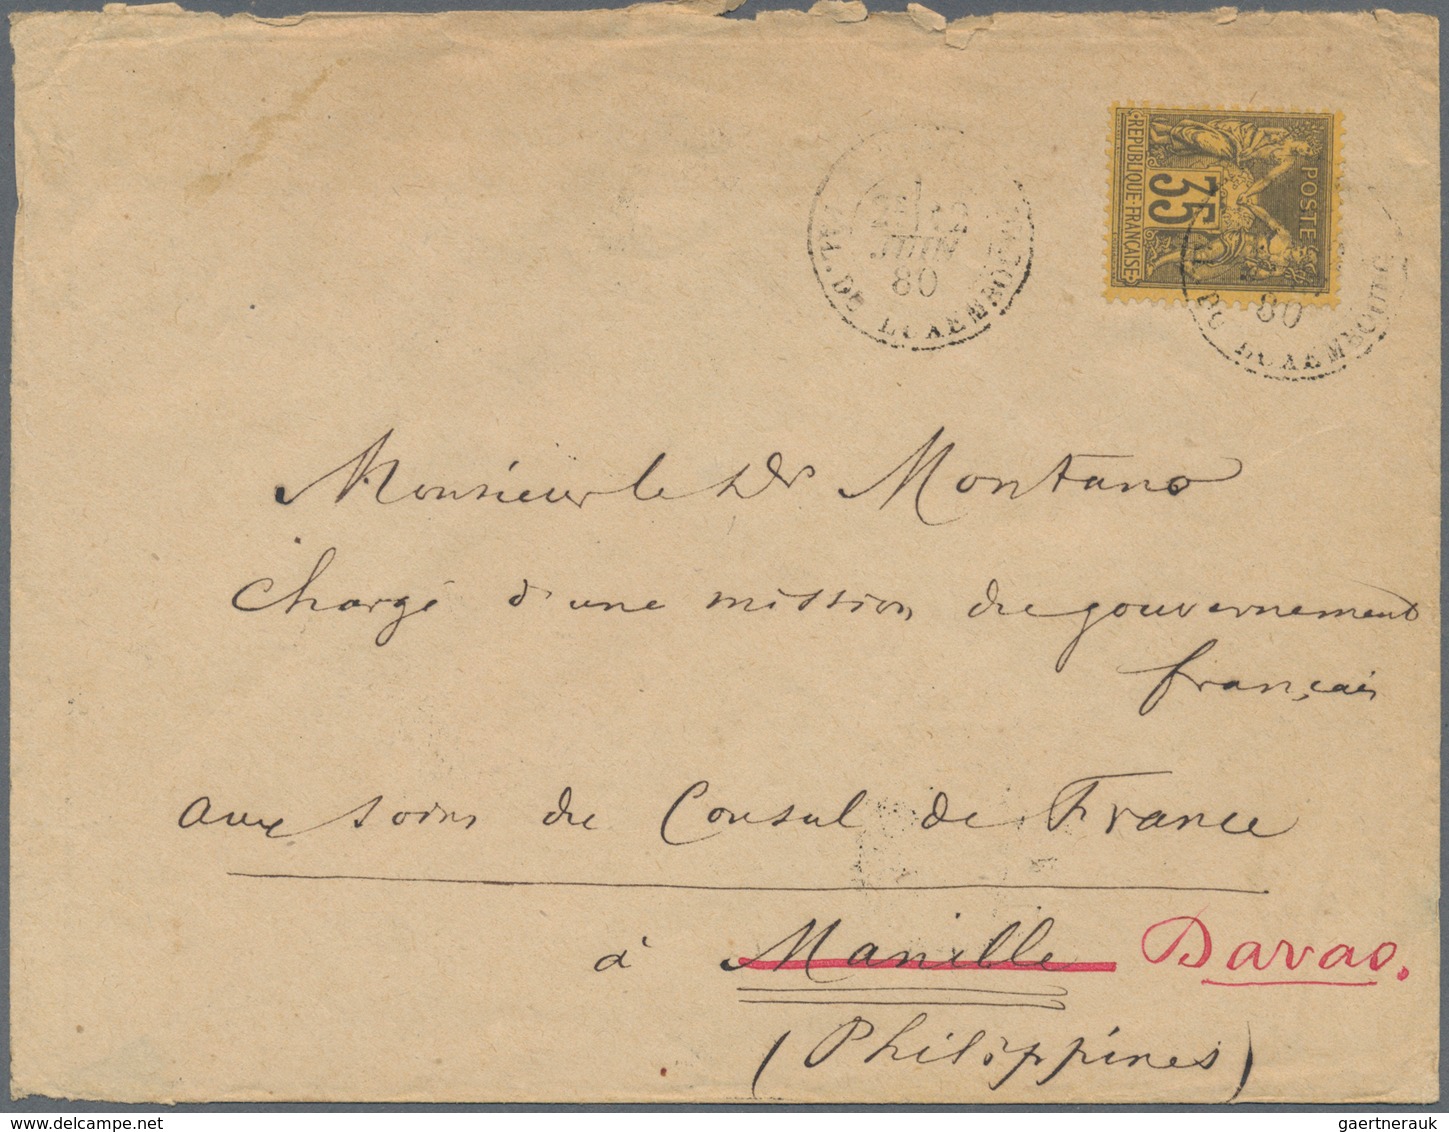 Philippinen: 1880. Envelope Addressed To The French Scientific Mission In Manila, Philippines Bearin - Philippines